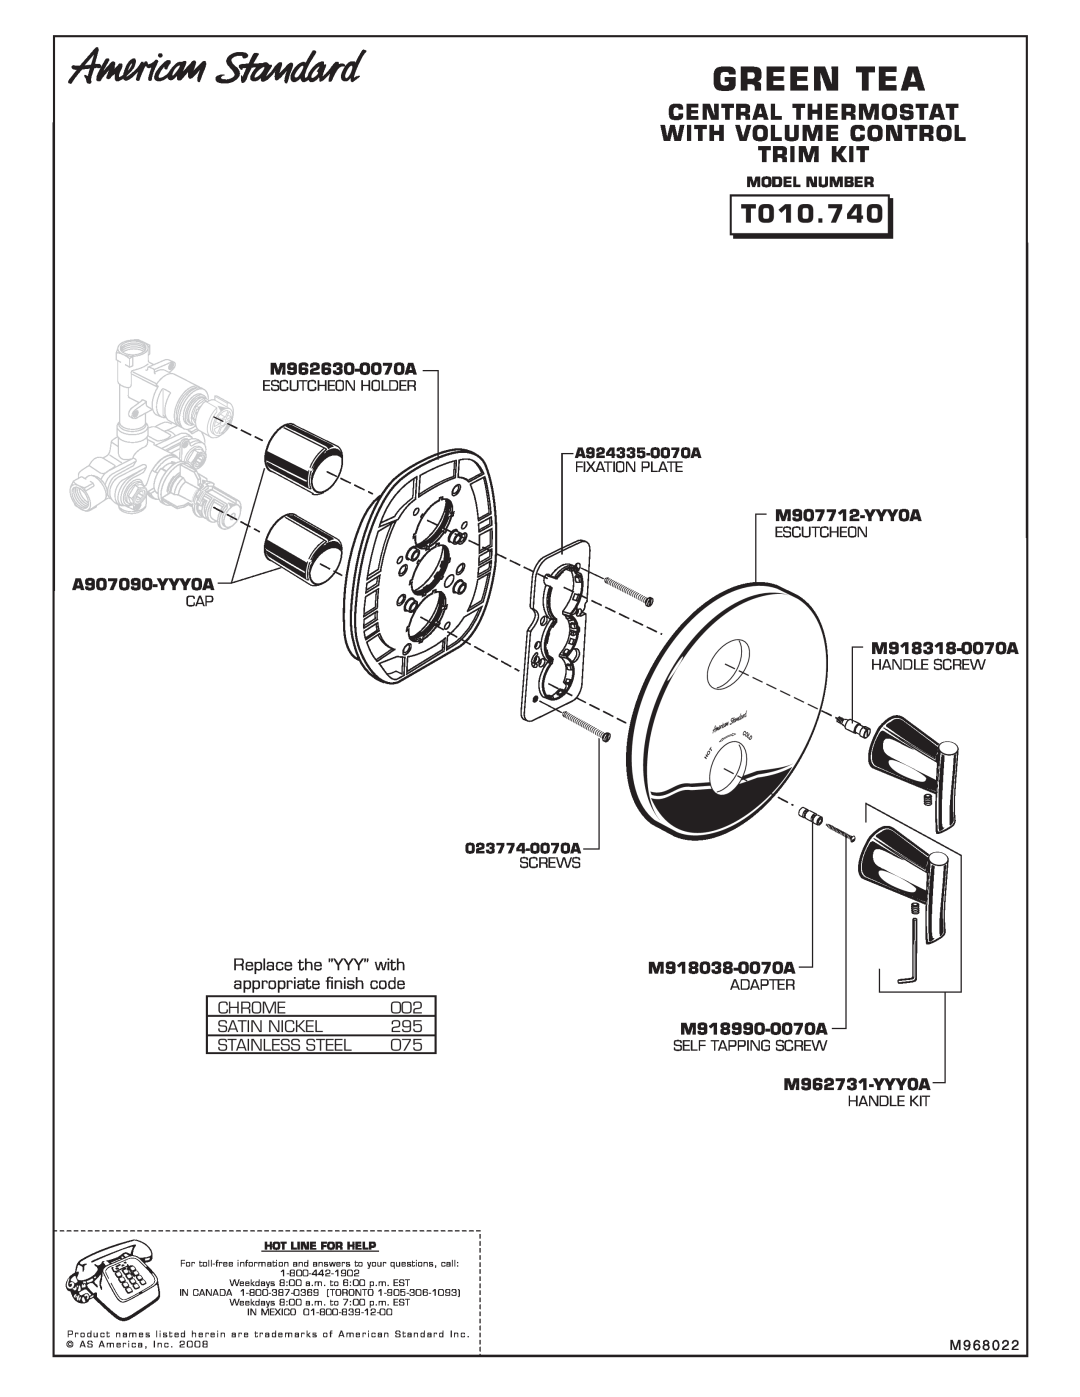 American Standard T010.740 Green Tea, Central Thermostat With Volume Control Trim Kit, M962630-0070A, A907090-YYY0A 